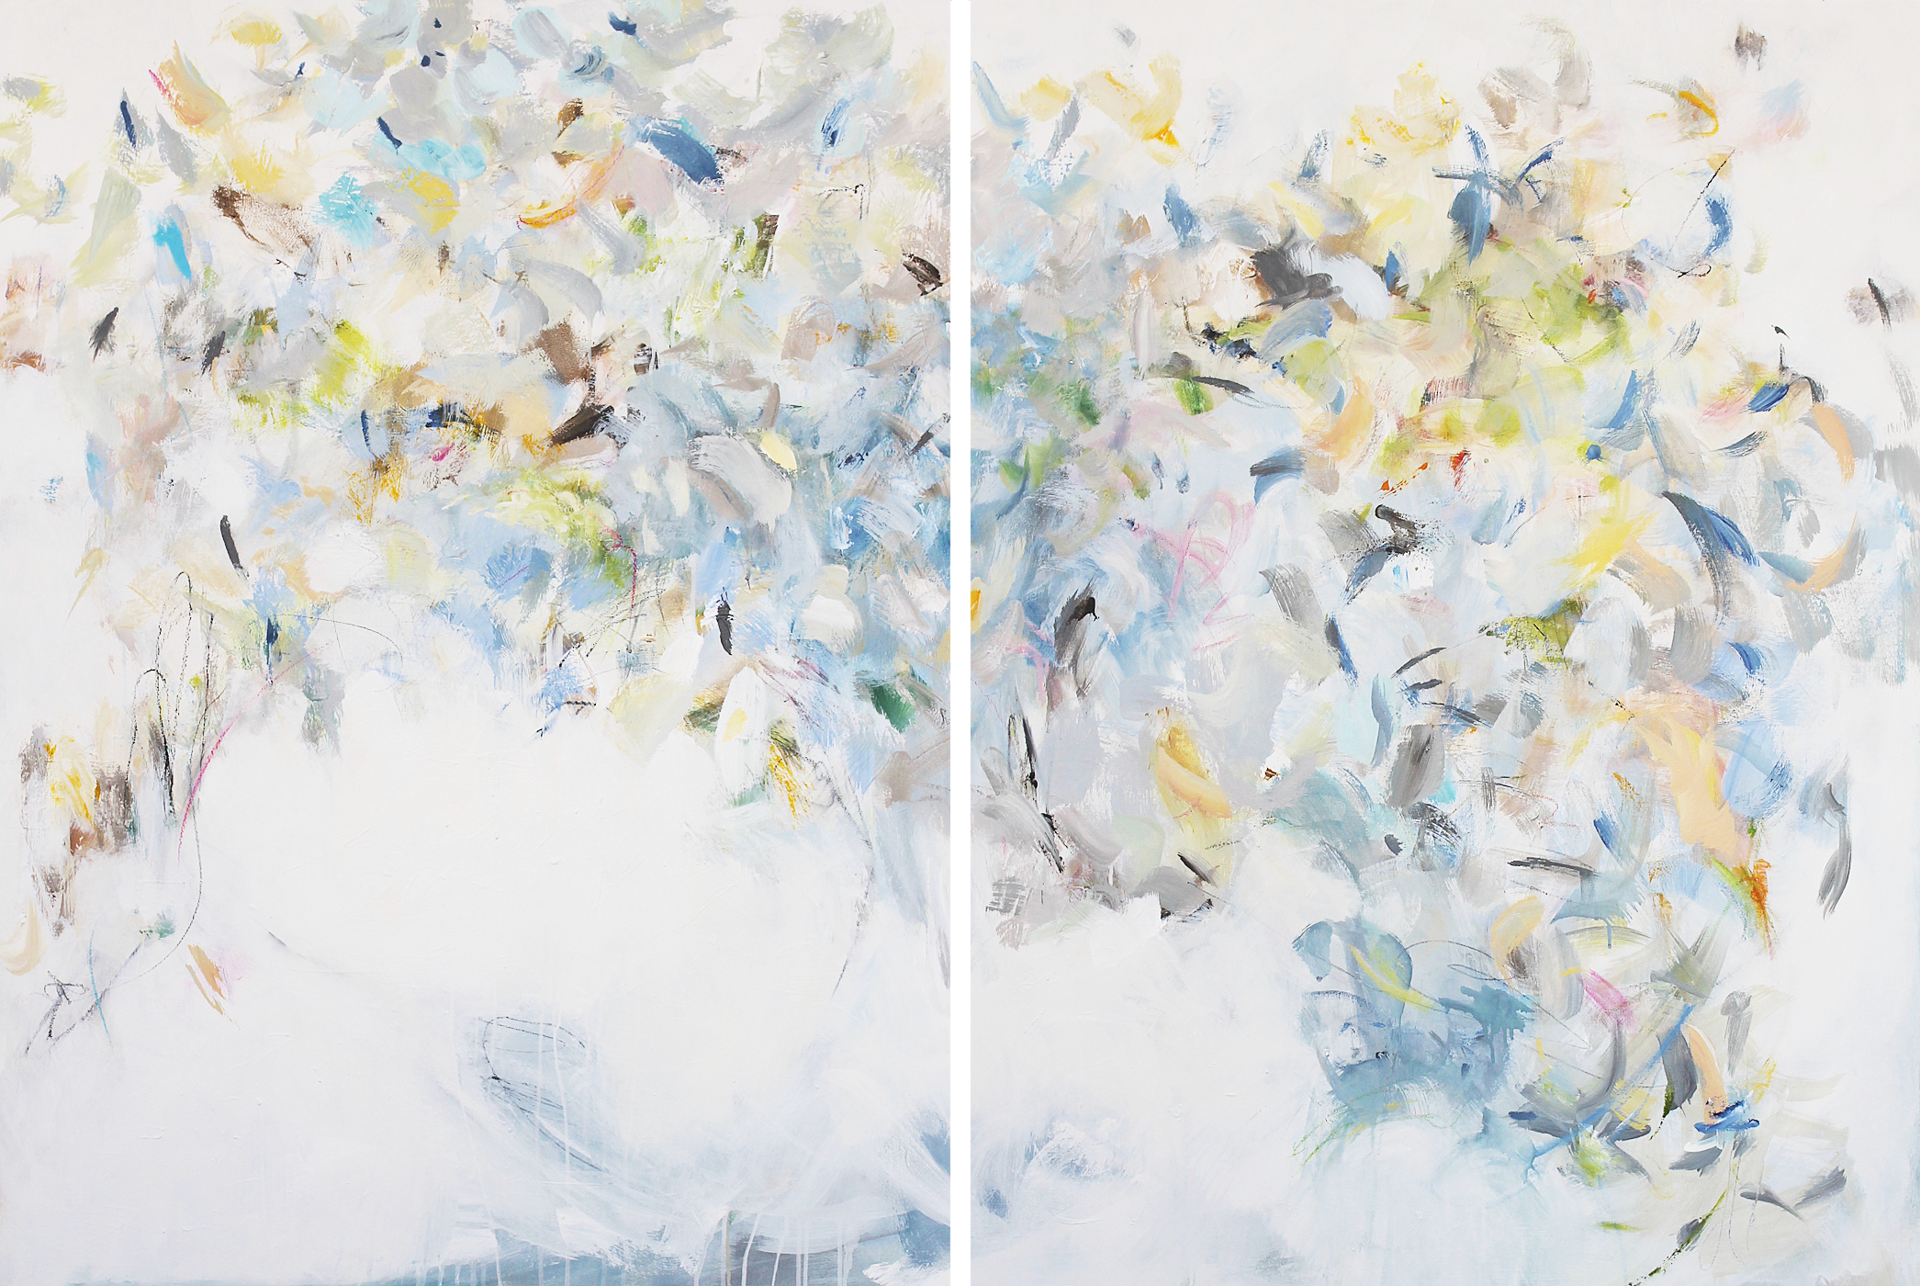 Whisper Yes (diptych) by Maria Burtis